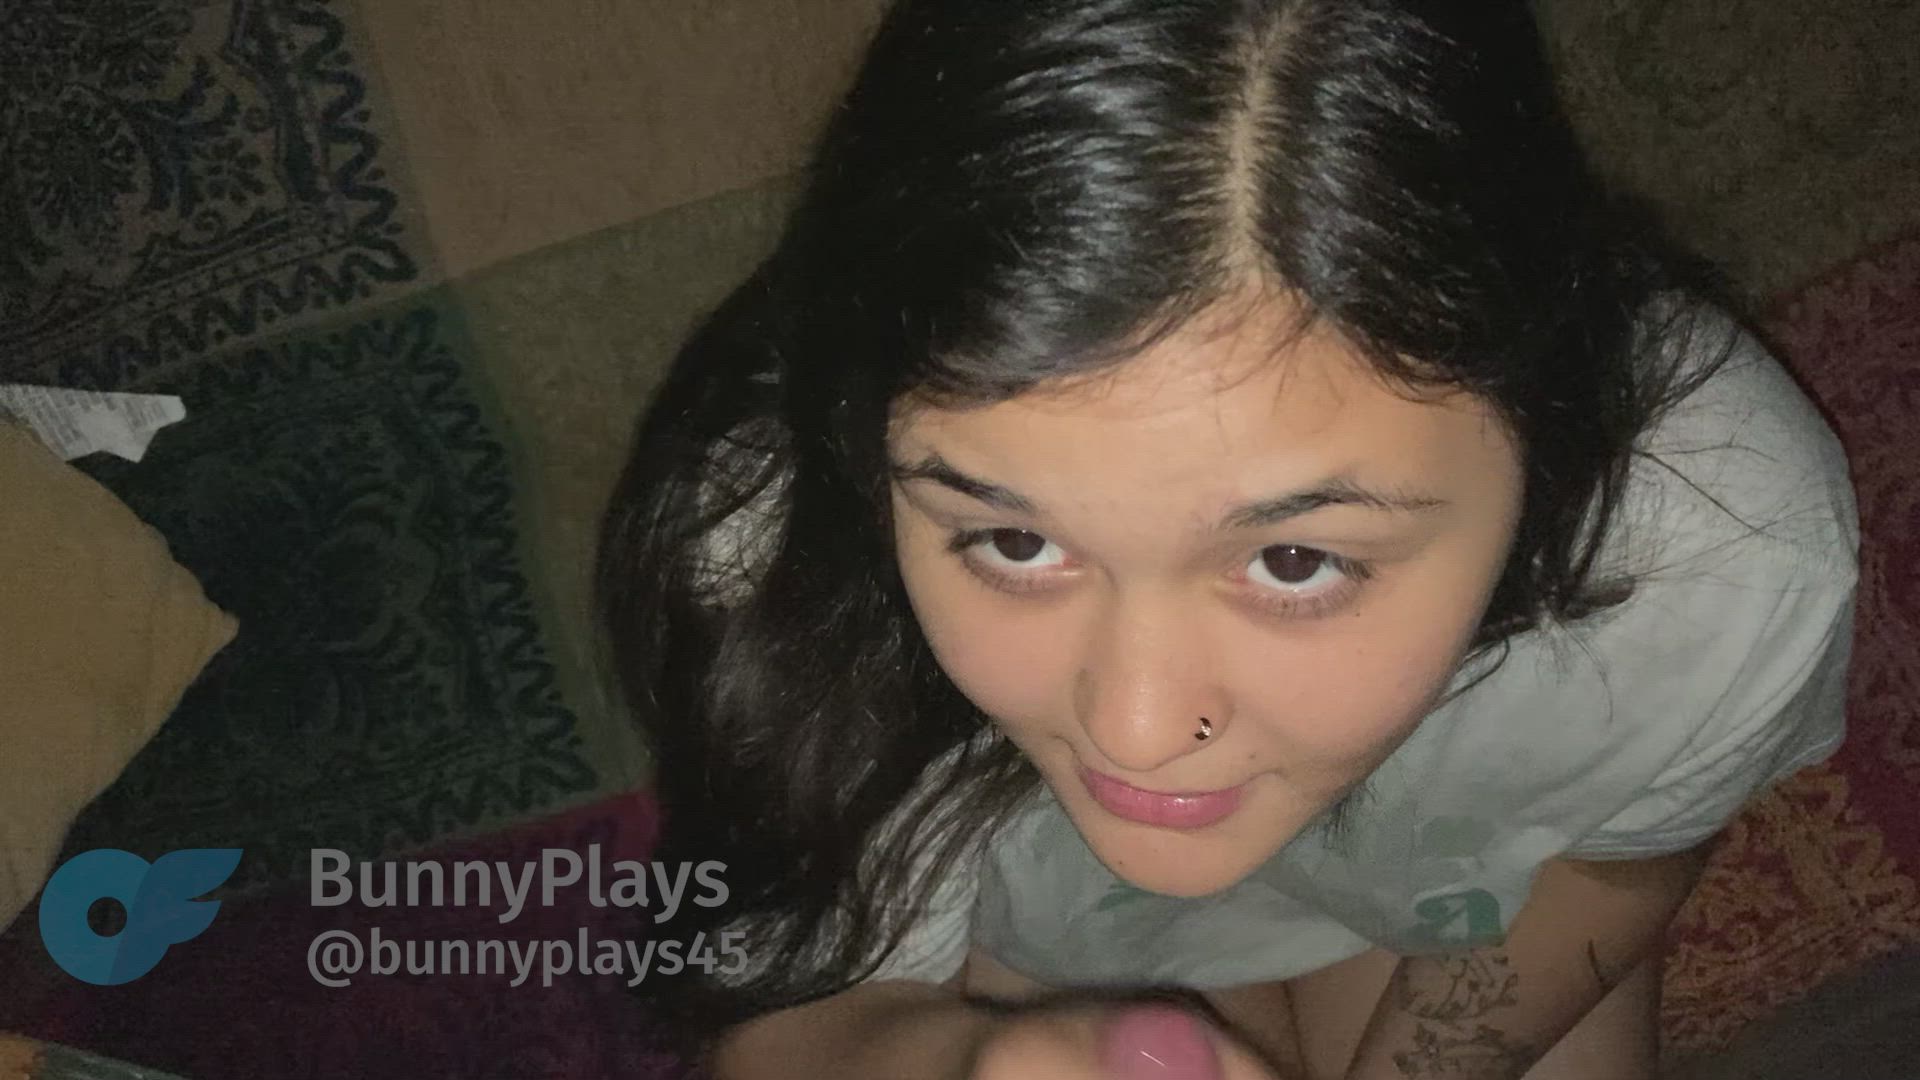 Amateur porn video with onlyfans model bunnyplays45 <strong>@bunnyplays45</strong>